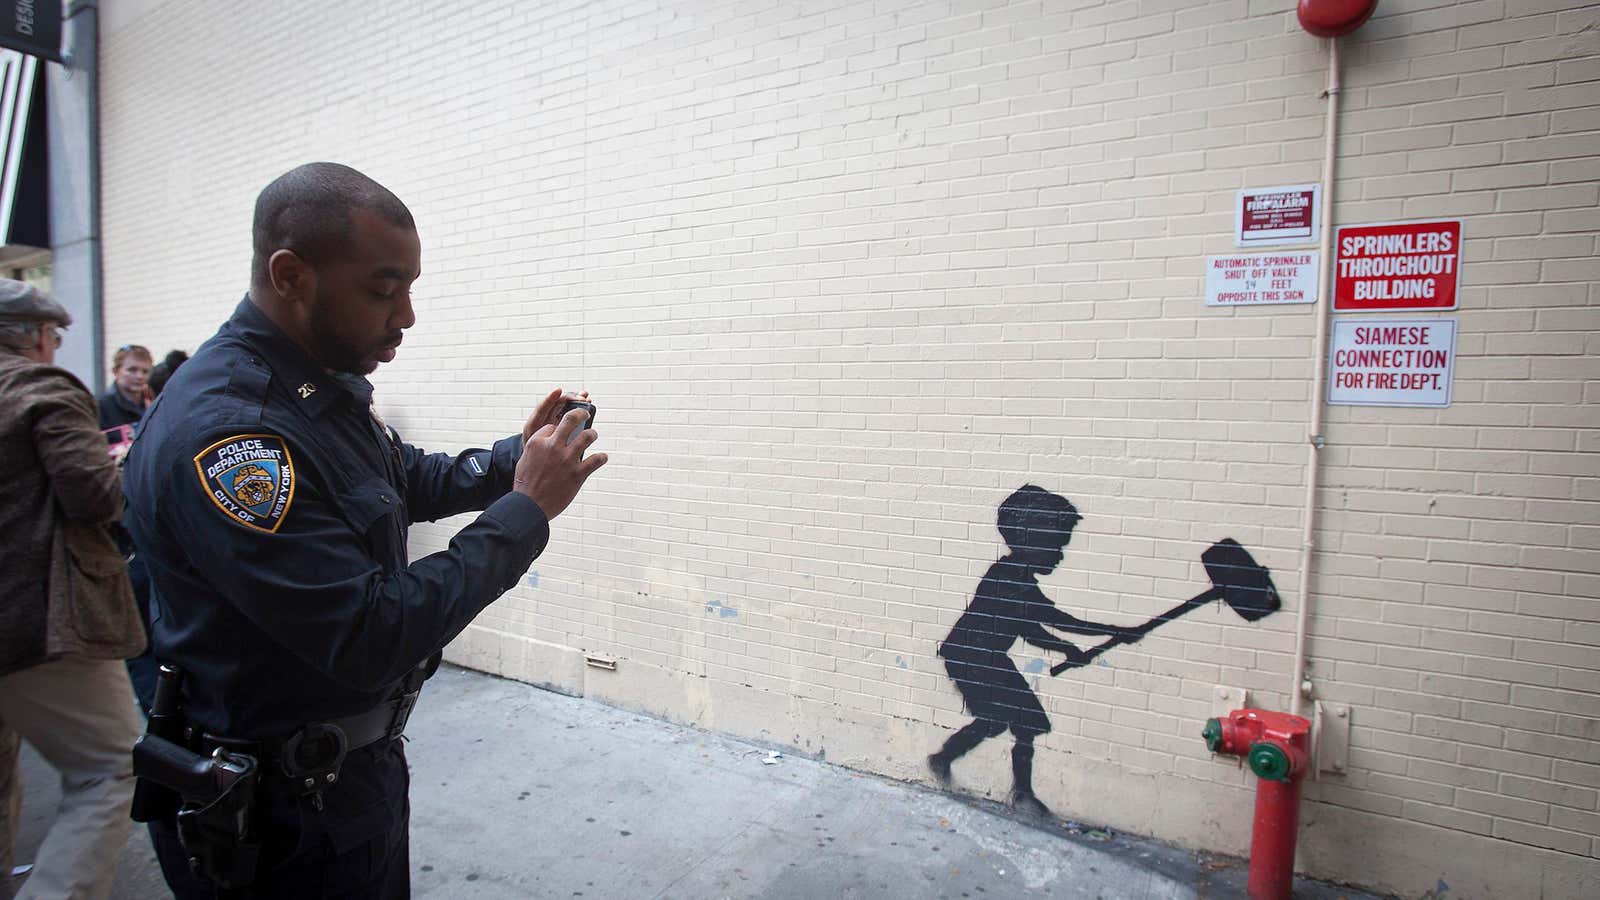 A police officer takes a photo of Banksy’s ostensibly illegal work.